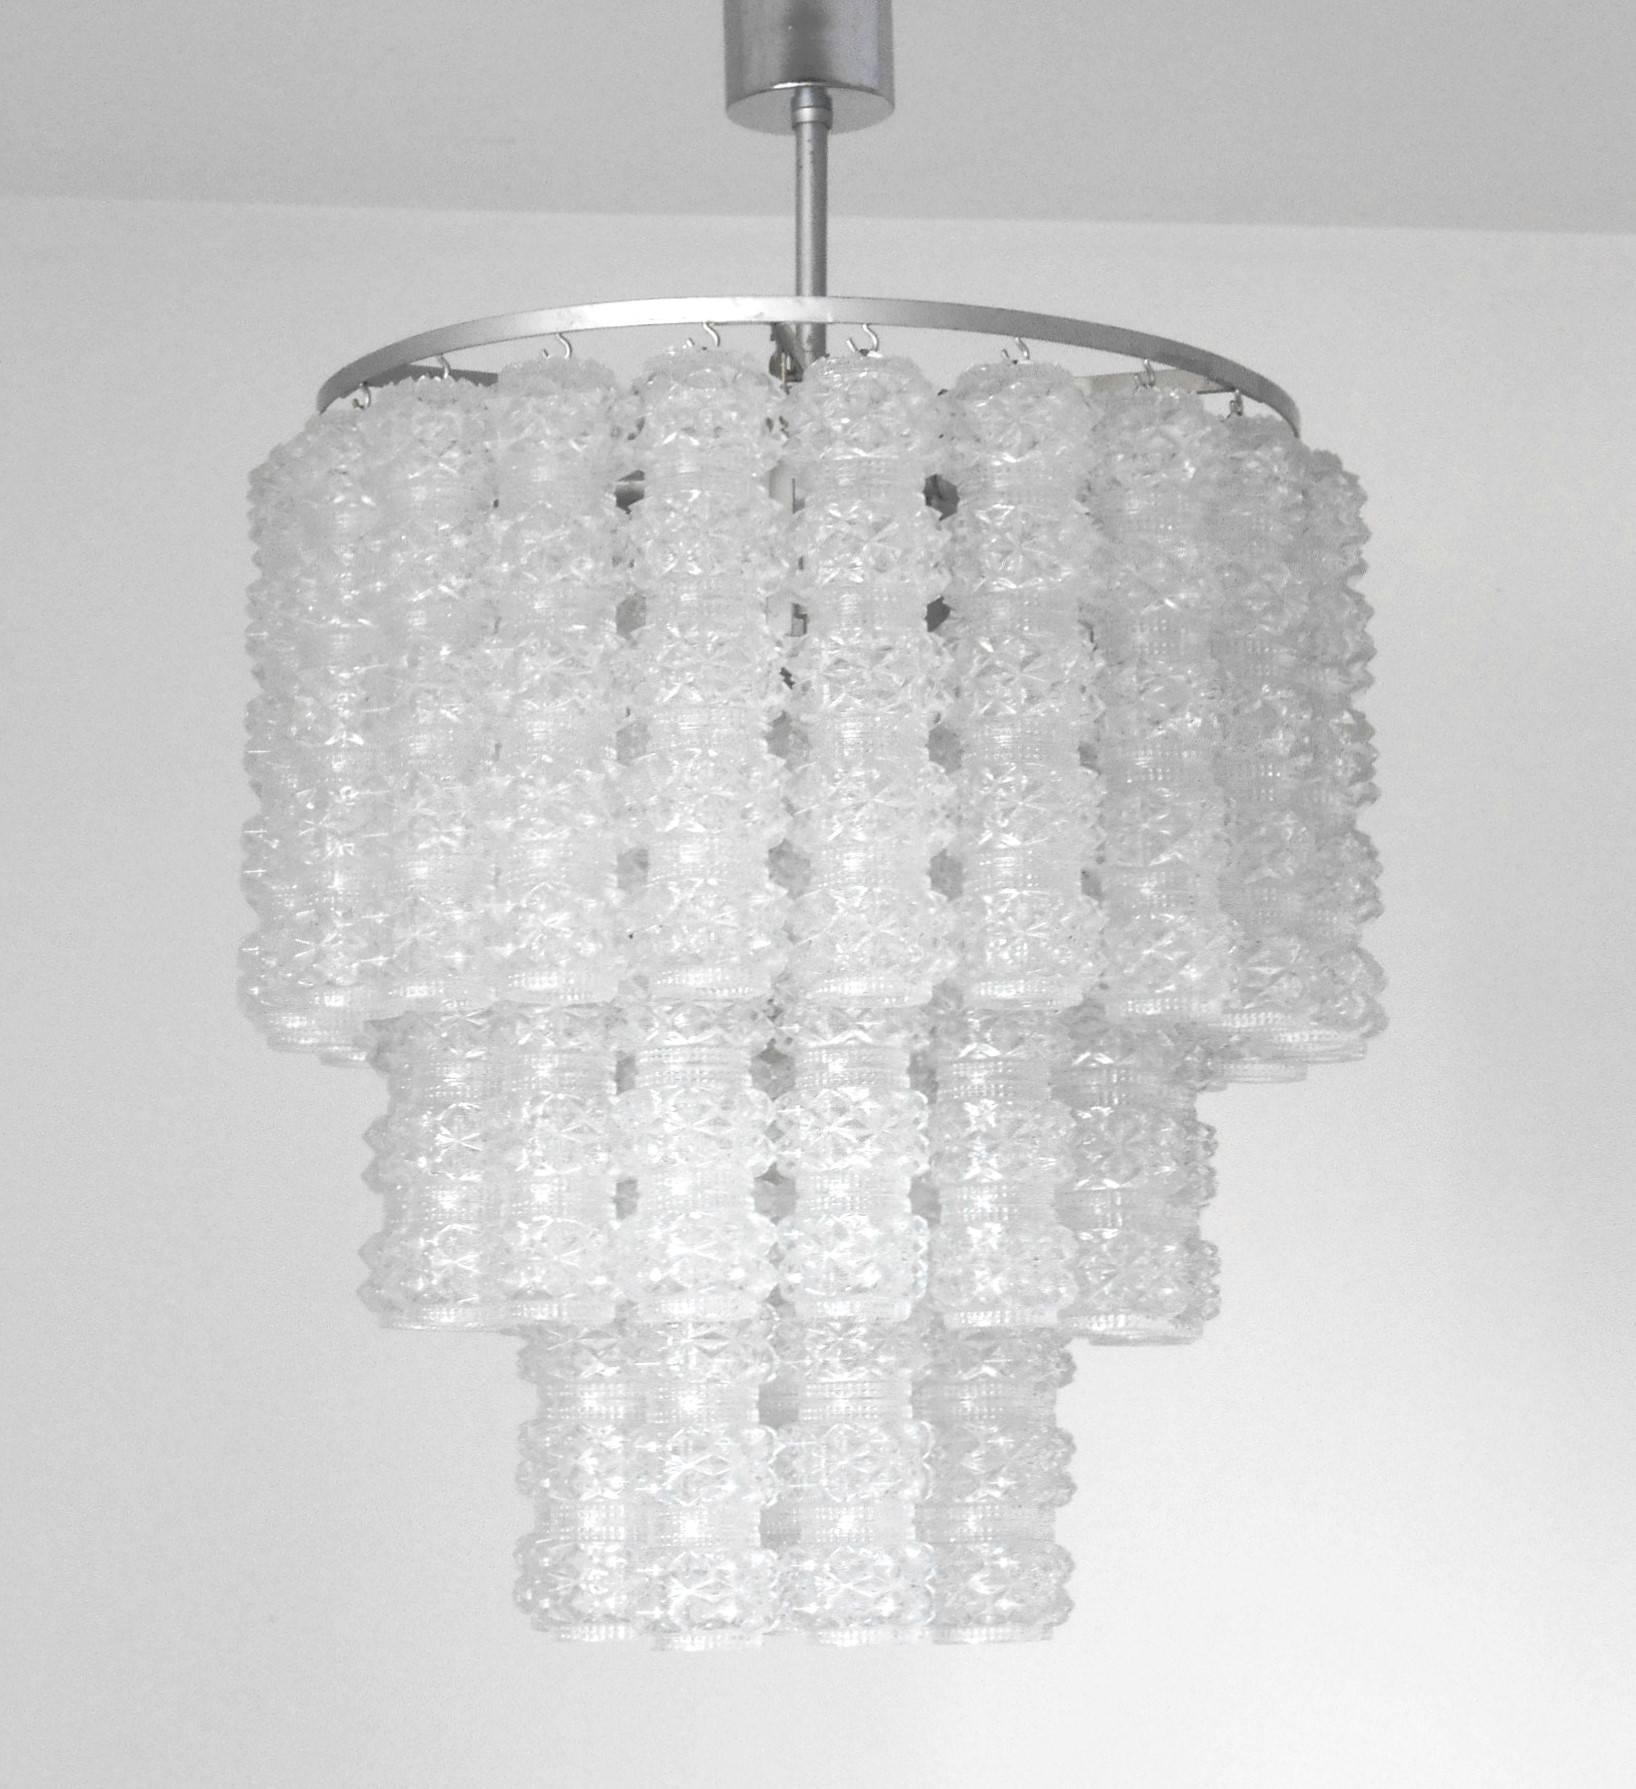 Vintage Italian chandelier with clear textured Murano glass tubes hanging from silver painted metal frame, by Venini. / Made in Italy in the 1960's.
9 lights / max 40W each
Diameter: 19 inches / Height: 32 inches
1 in stock in Palm Springs currently